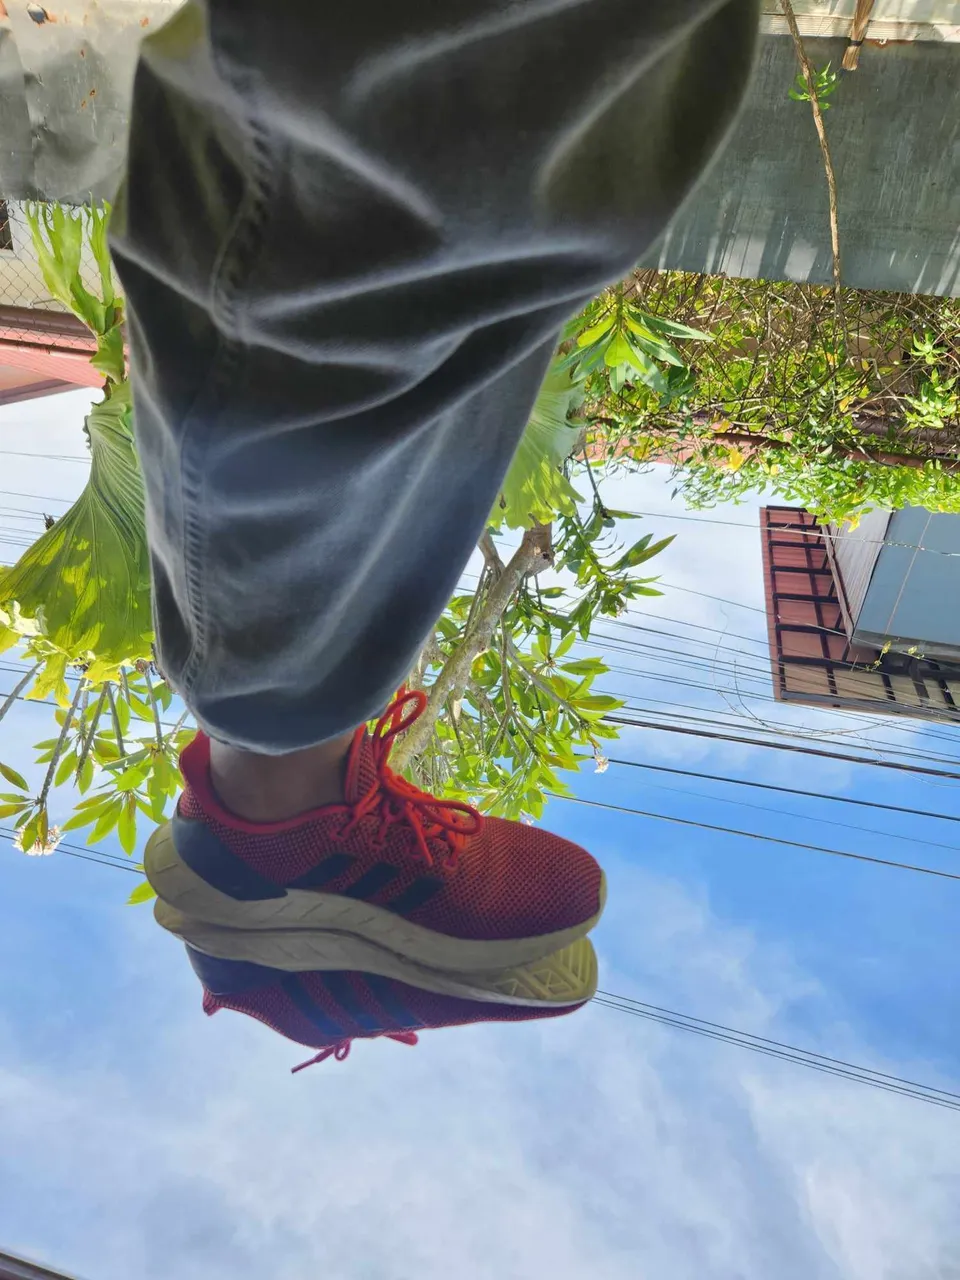 Phonography/Phone Photography Contest 01 - My Shoes From A Different Perspective